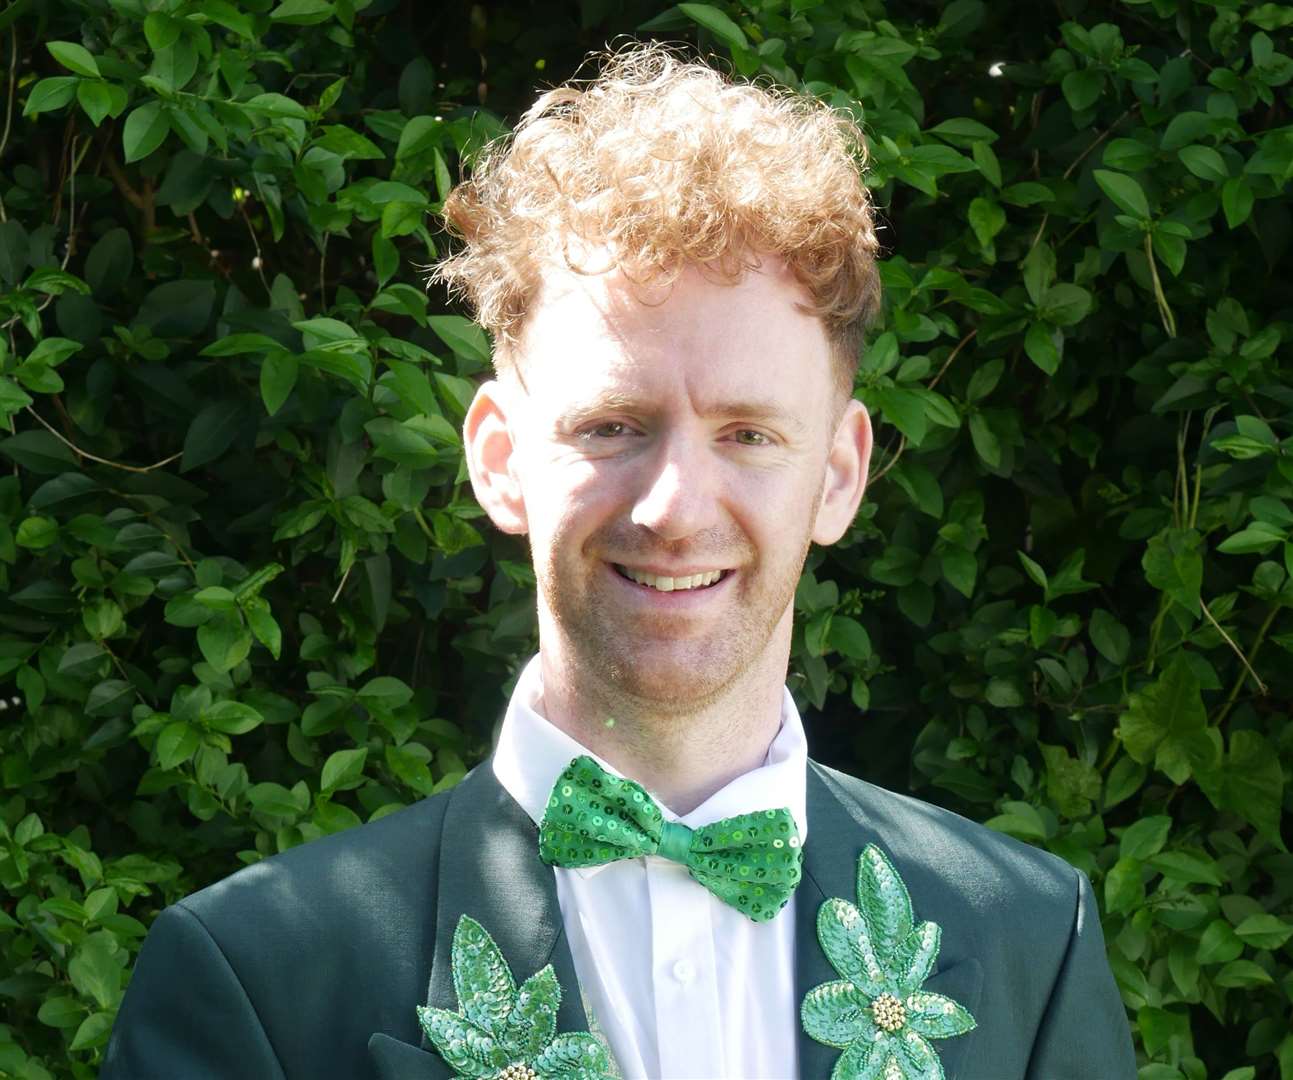 Chris Rankin, best known for his role as Percy Weasley in Harry Potter, will play The Wizard of Oz. Picture: Trio Entertainment